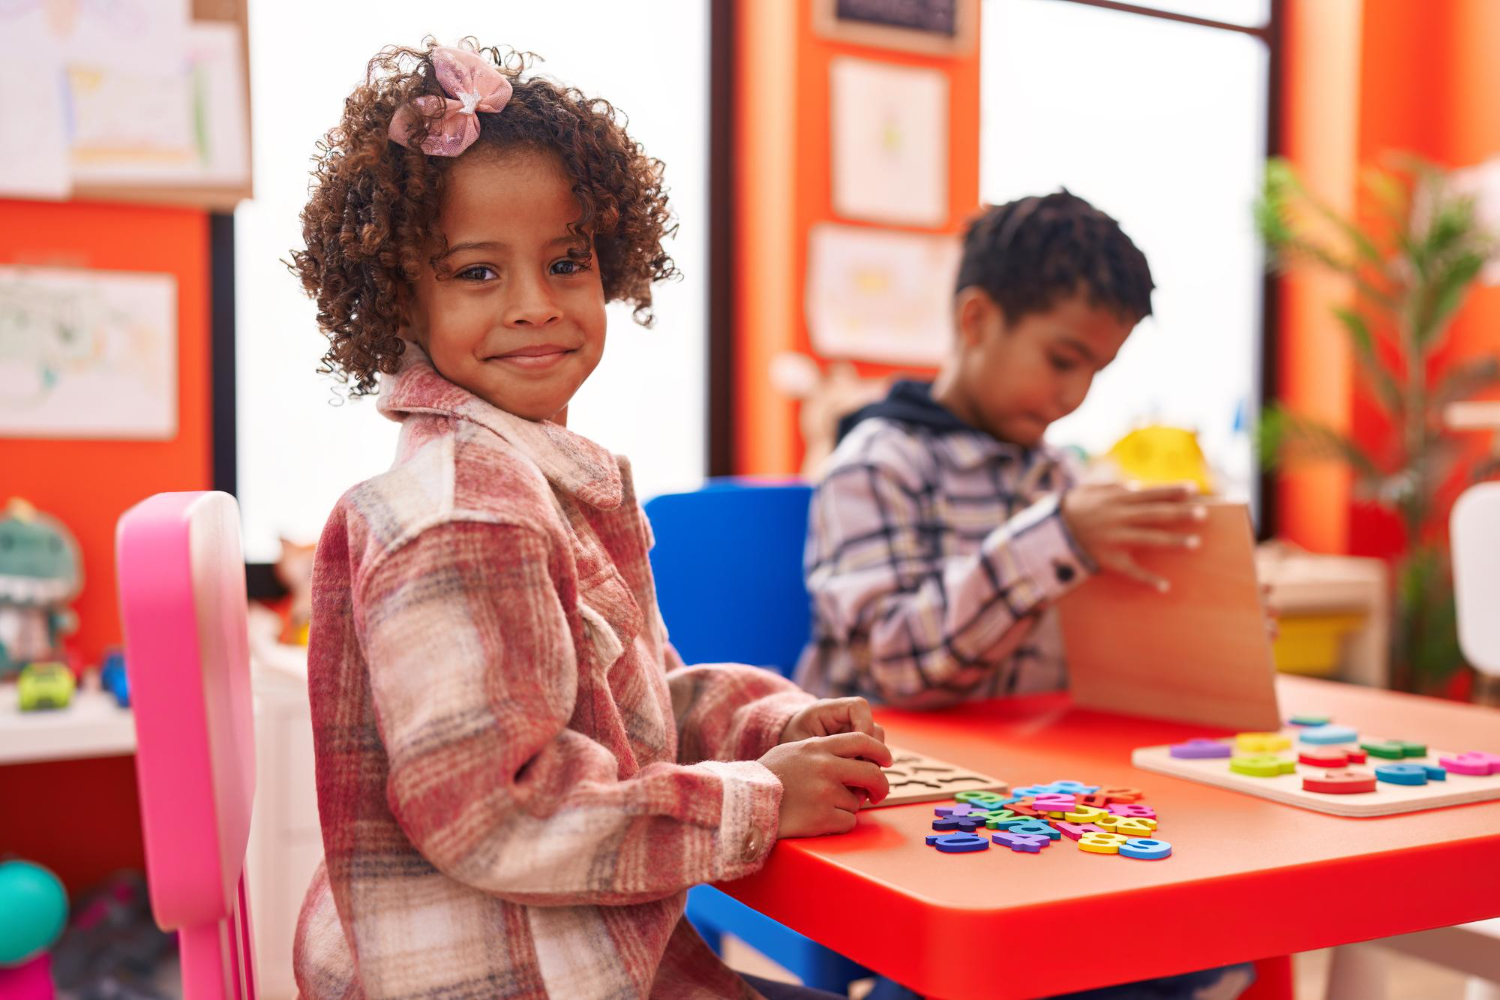 What to Look for in an Ohio Daycare